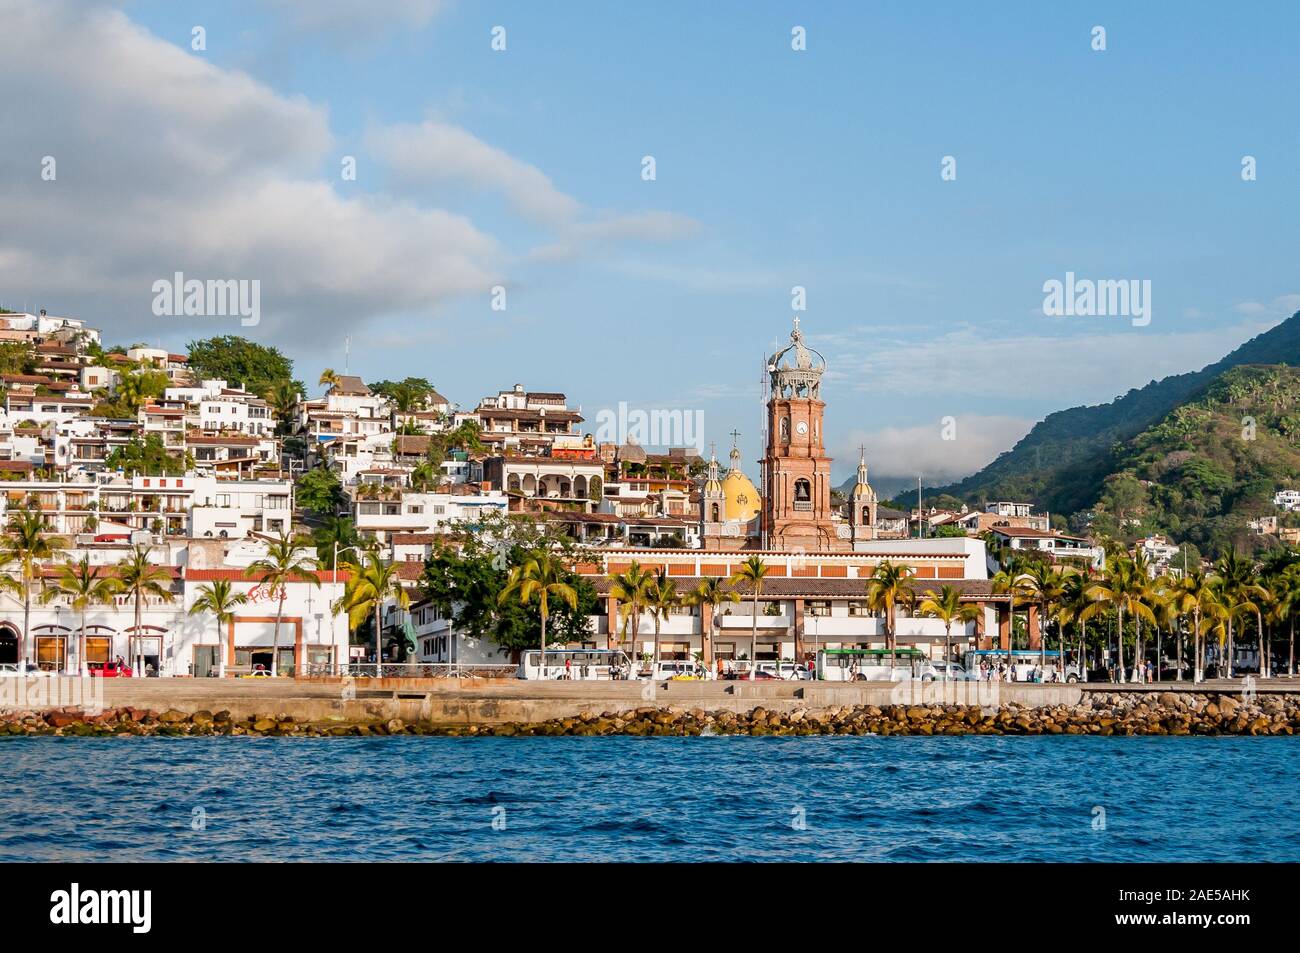 View of downtown Puerto Vallarta as seen from water, Our Lady of Guadalupe church bell towers and gold dome, pedestrians on the malecon waterfront. Stock Photo